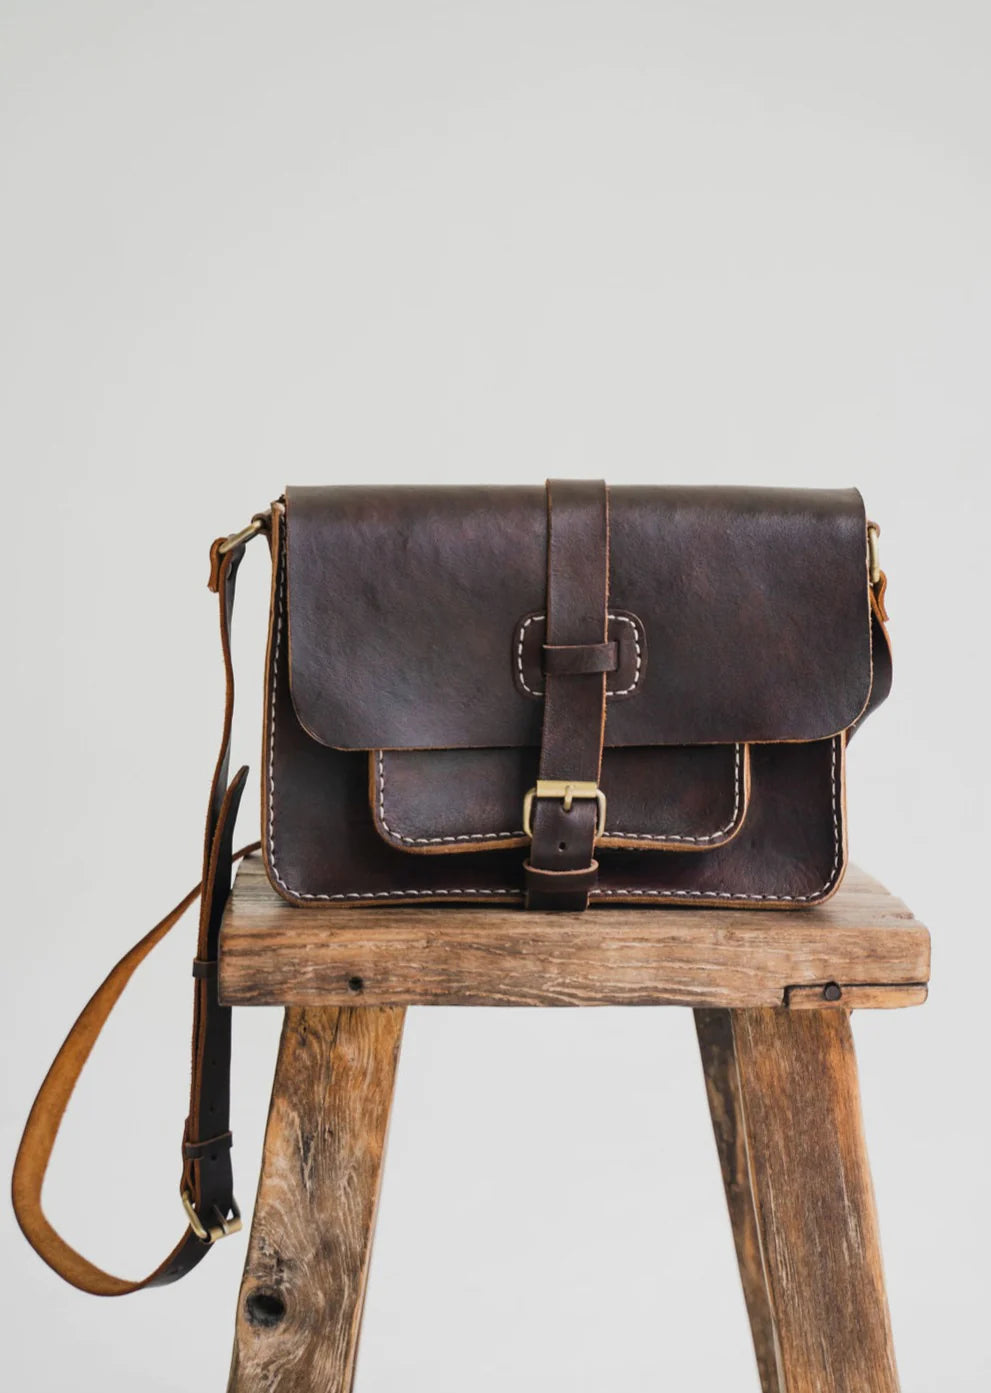 Hobo and Hatch - Rising Sun Satchel - Vintage Brown